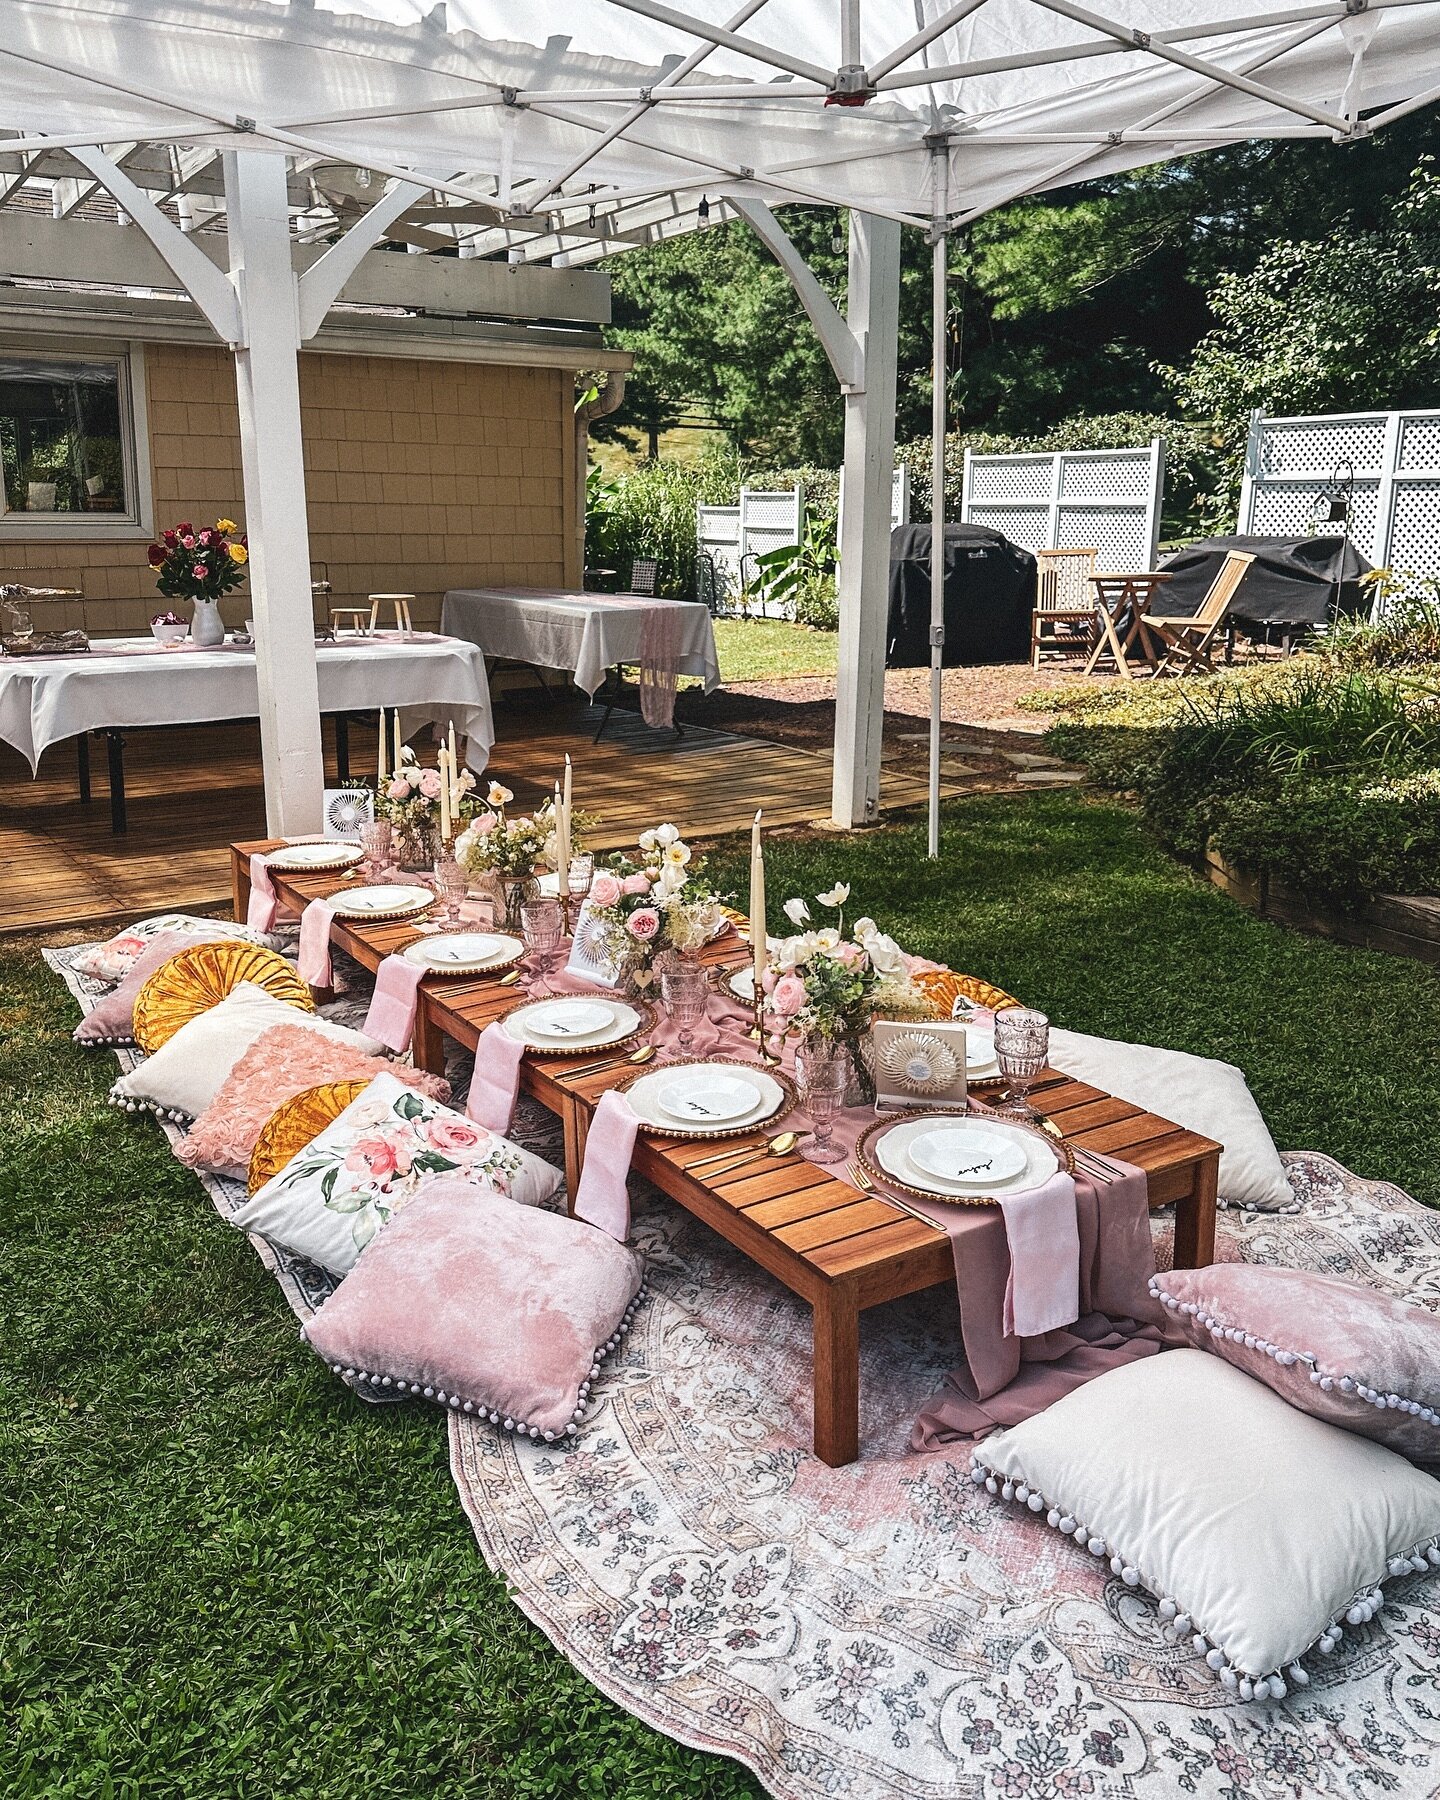 A picturesque setting for Alisanne's journey to 'I do.' 💖✨ #bridalparty #picnicparty #idocrew #pinknic